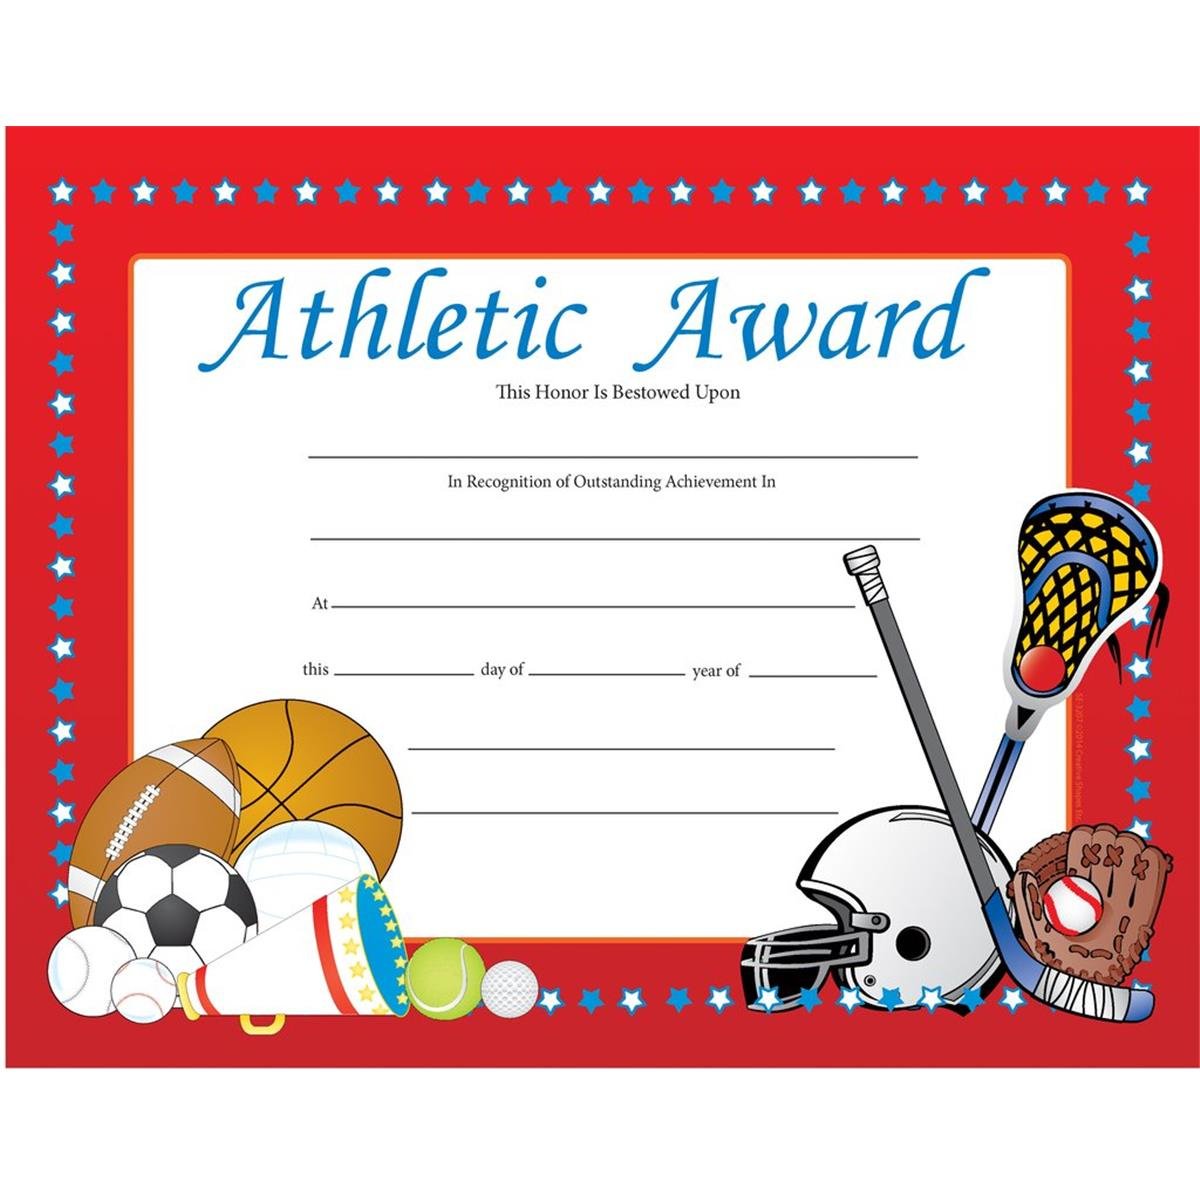 Se-3207 8.5 X 11 In. Athletic Award Certificate - 30 Sheets Per Pack